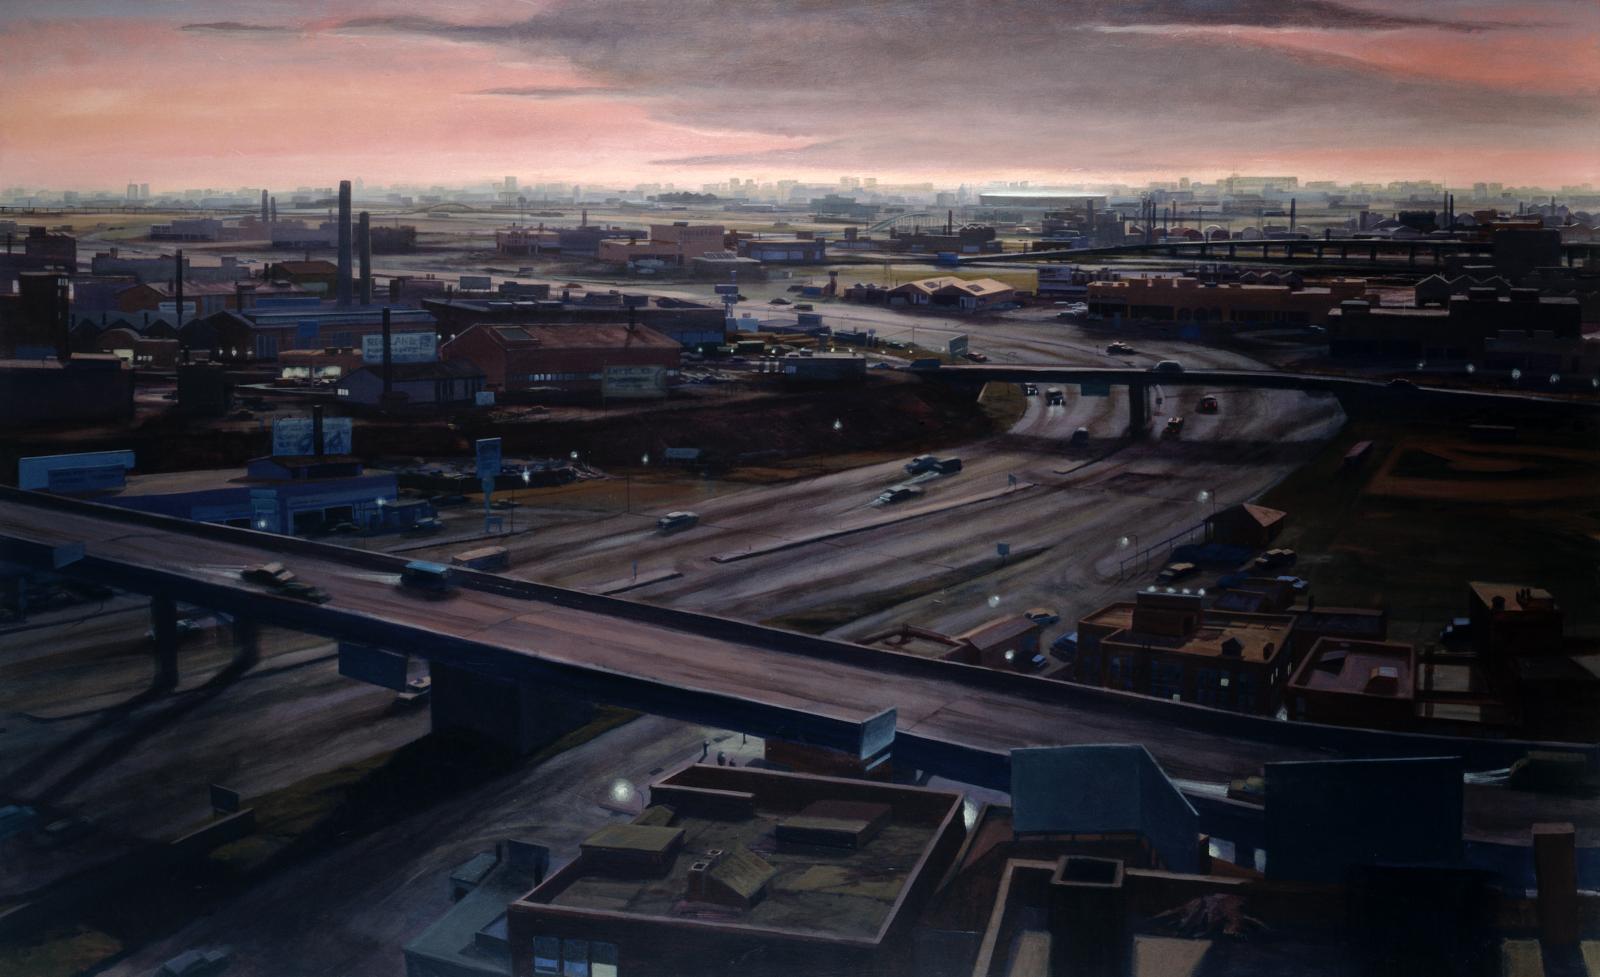 The sun is rising or setting above the skyline of a vast city, which is visible in the distance. We look down on the outskirts: a highway with multiple lanes in both directions curves serpentine-like from the bottom left-hand side of the picture to the right, then around toward the upper left-hand distance. It is crossed by two overpasses. On either side of the highway are industrial buildings, rail yards, bill boards, smoke stacks. There is a surreal, desolate air to the scene.Aside from the few cars, there is no sense of life or movement. The light is a lurid purple.